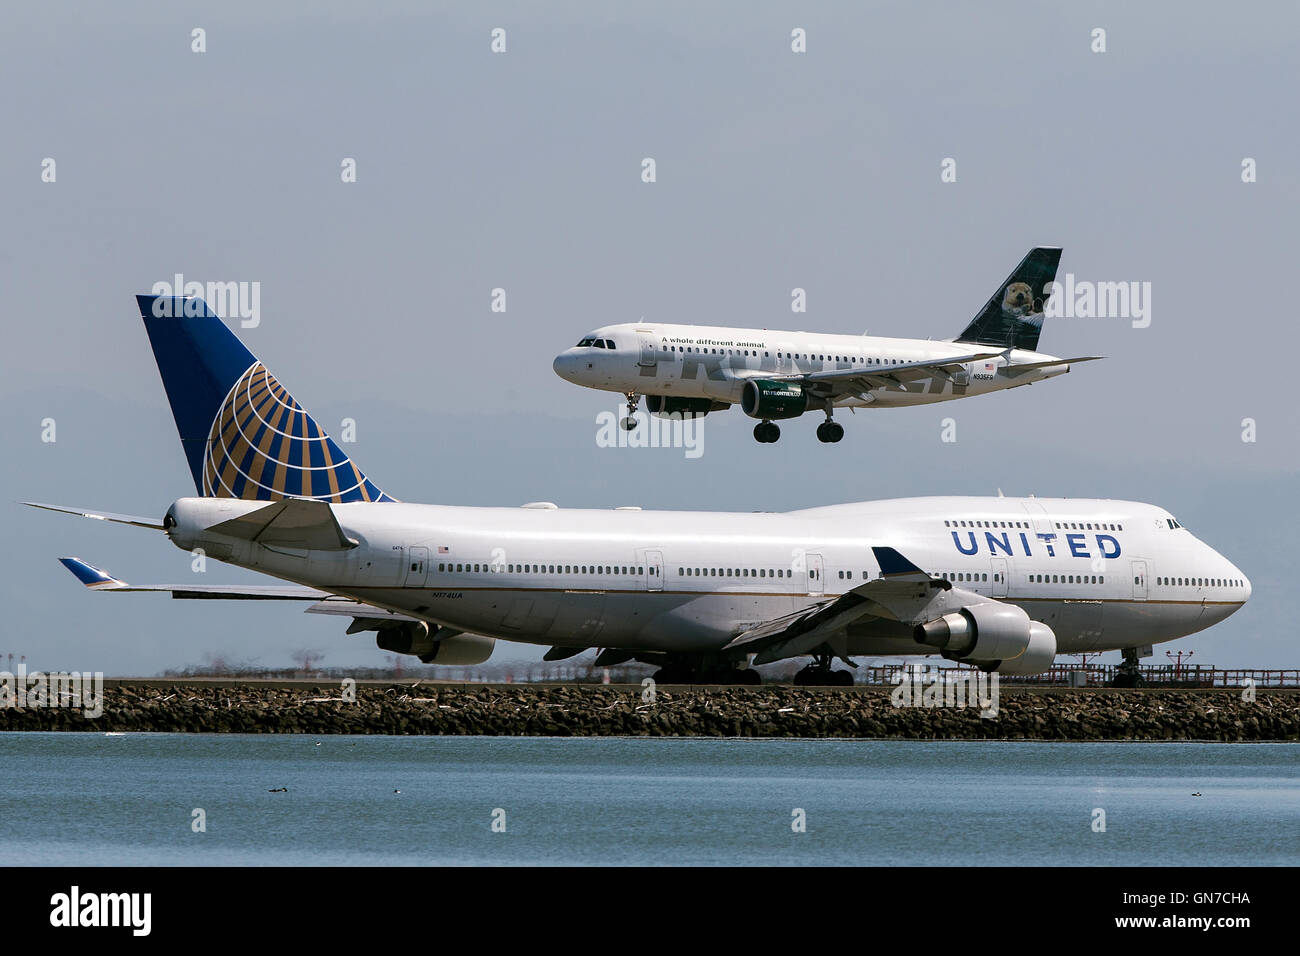 Frontier Airlines Airbus A319-111 (N935FR) lands past United Airlines Boeing 747-422 (N174UA) at San Francisco International Airport (SFO), Millbrae, California, United States of America Stock Photo